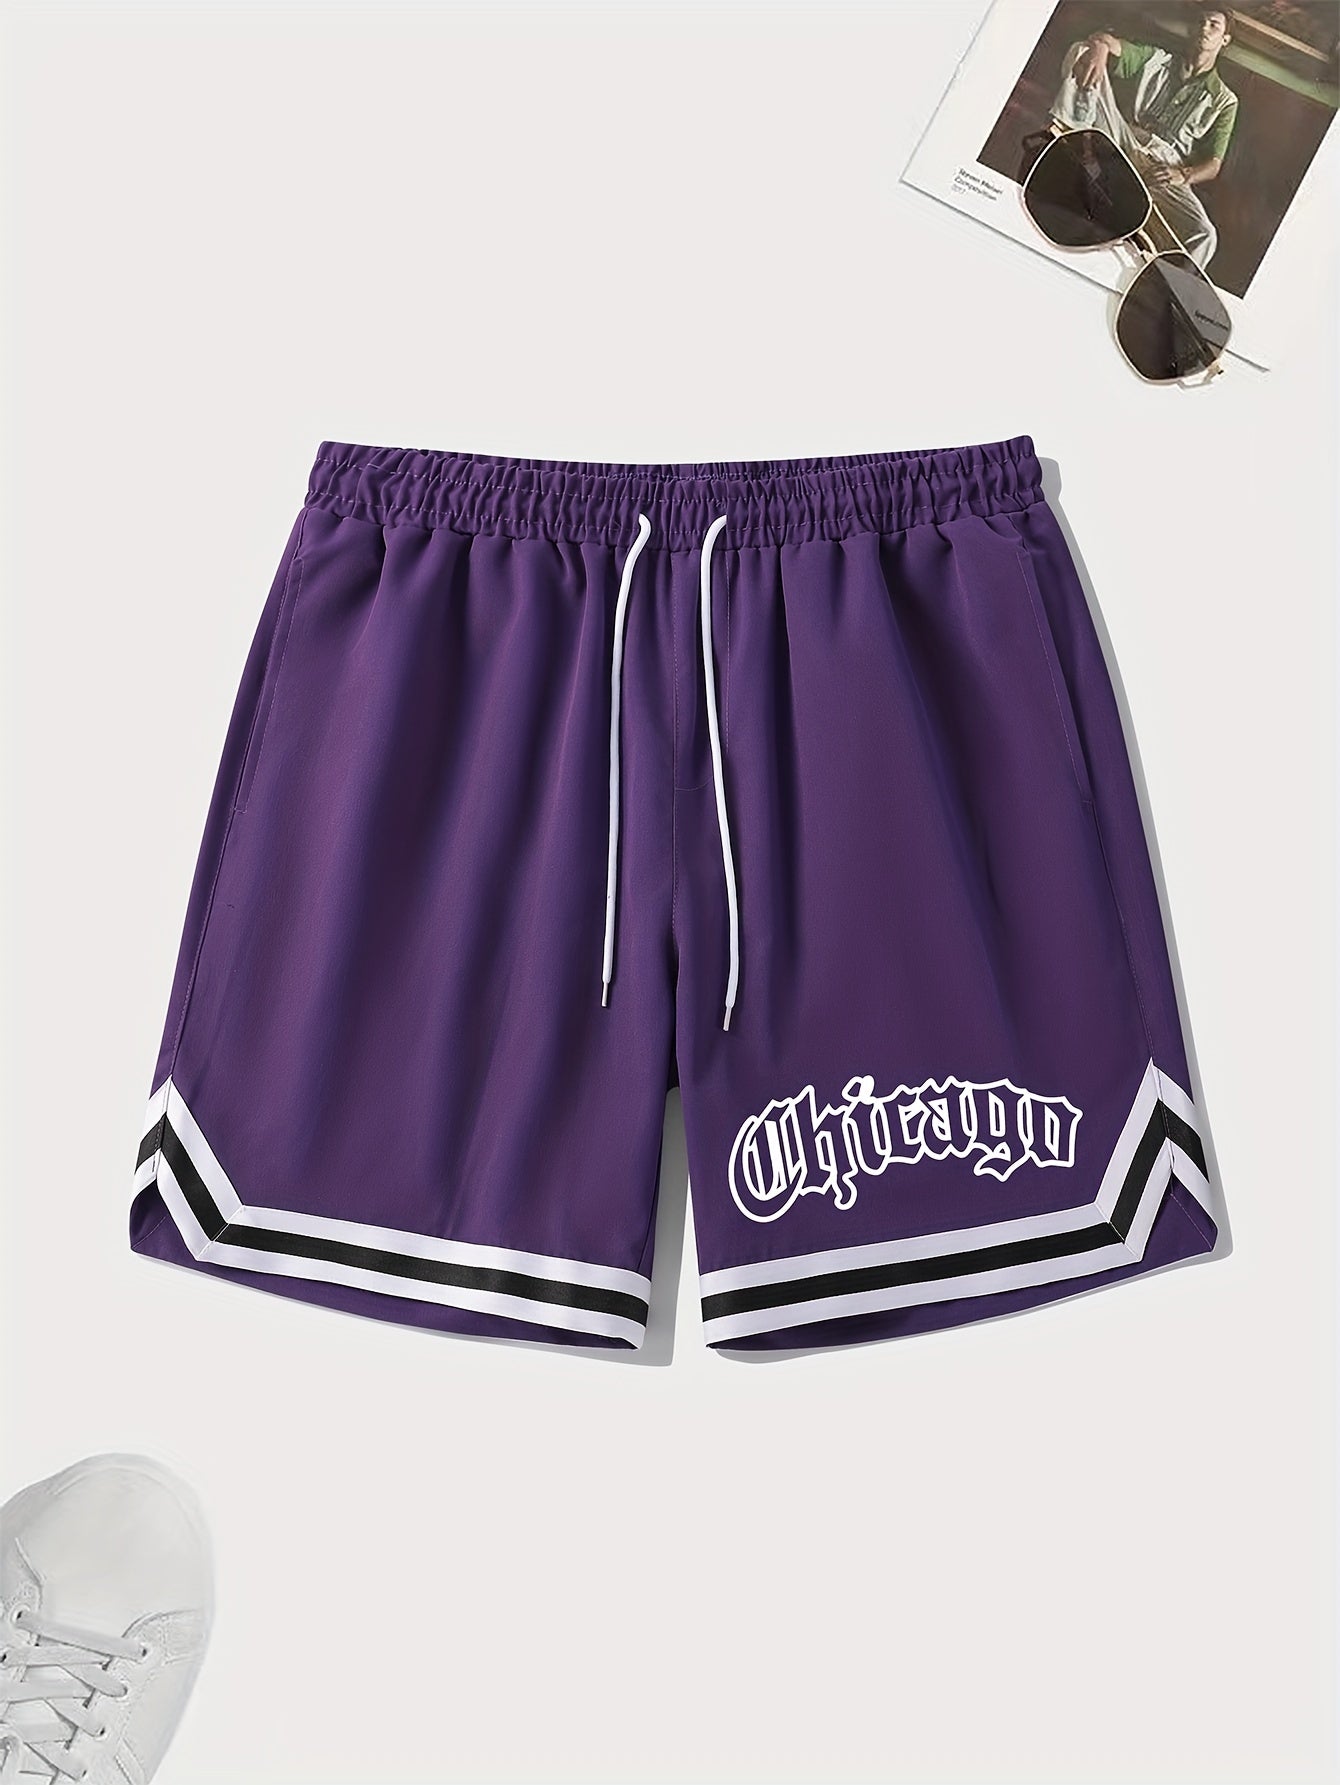 Men's 'Chicago' Basketball Shorts - Summer Style Must-Have!